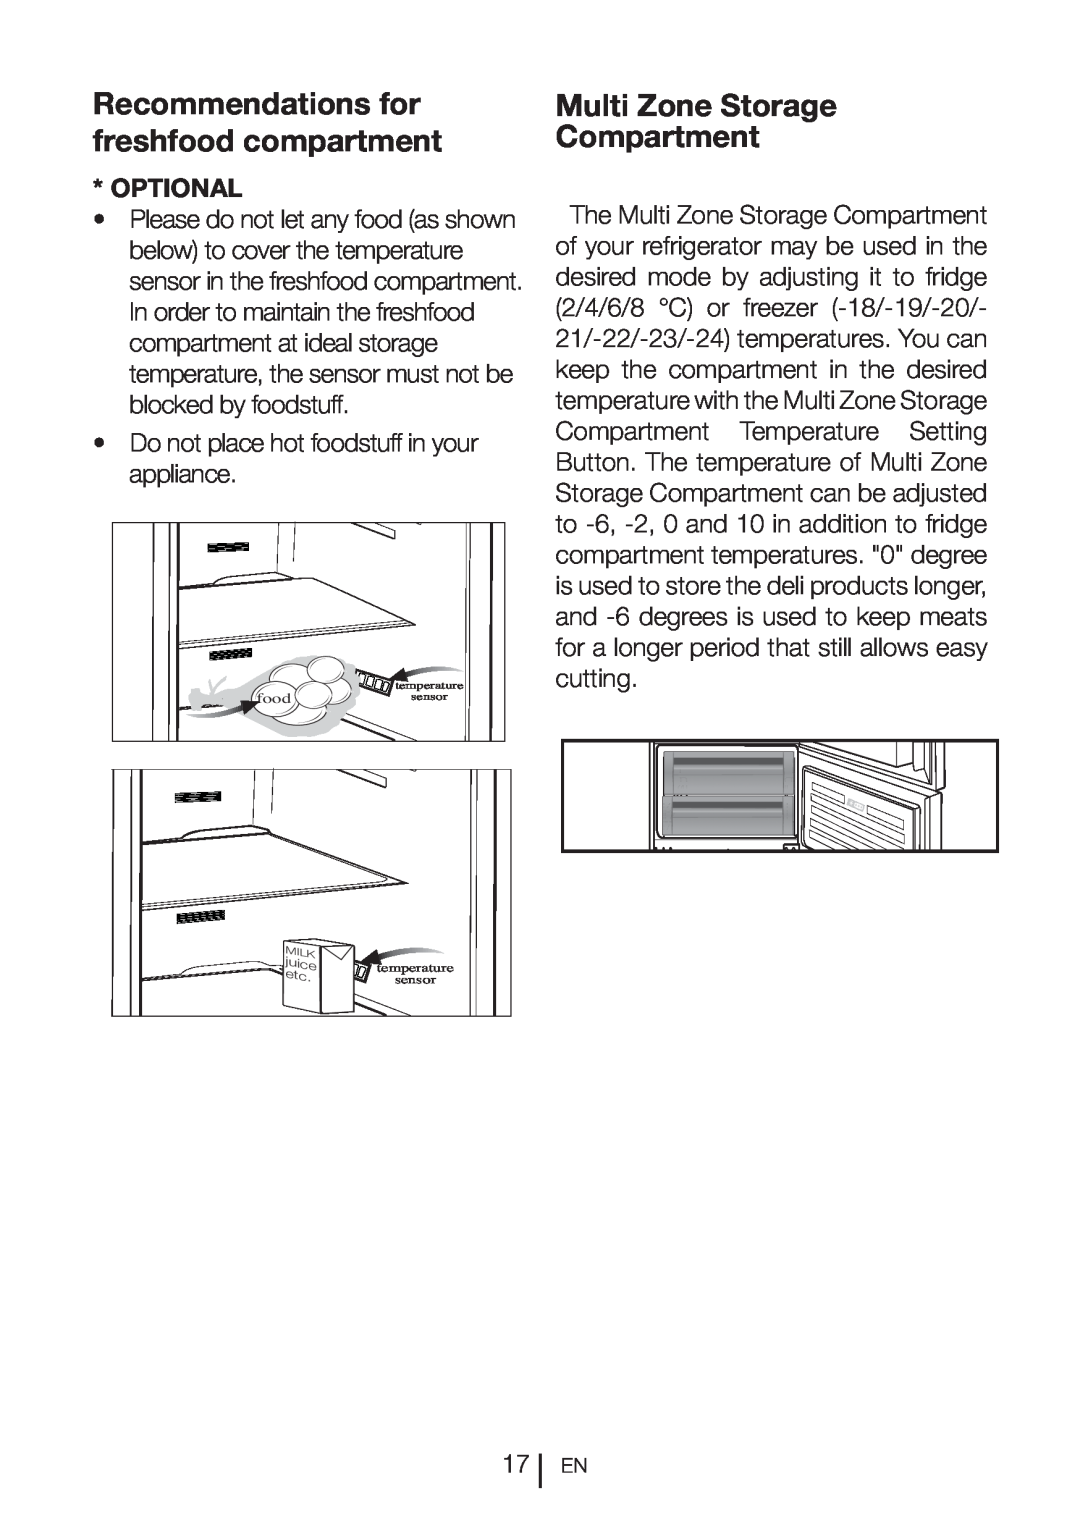 Beko CFF6873GX manual Recommendations for freshfood compartment, Multi Zone Storage Compartment, Optional 